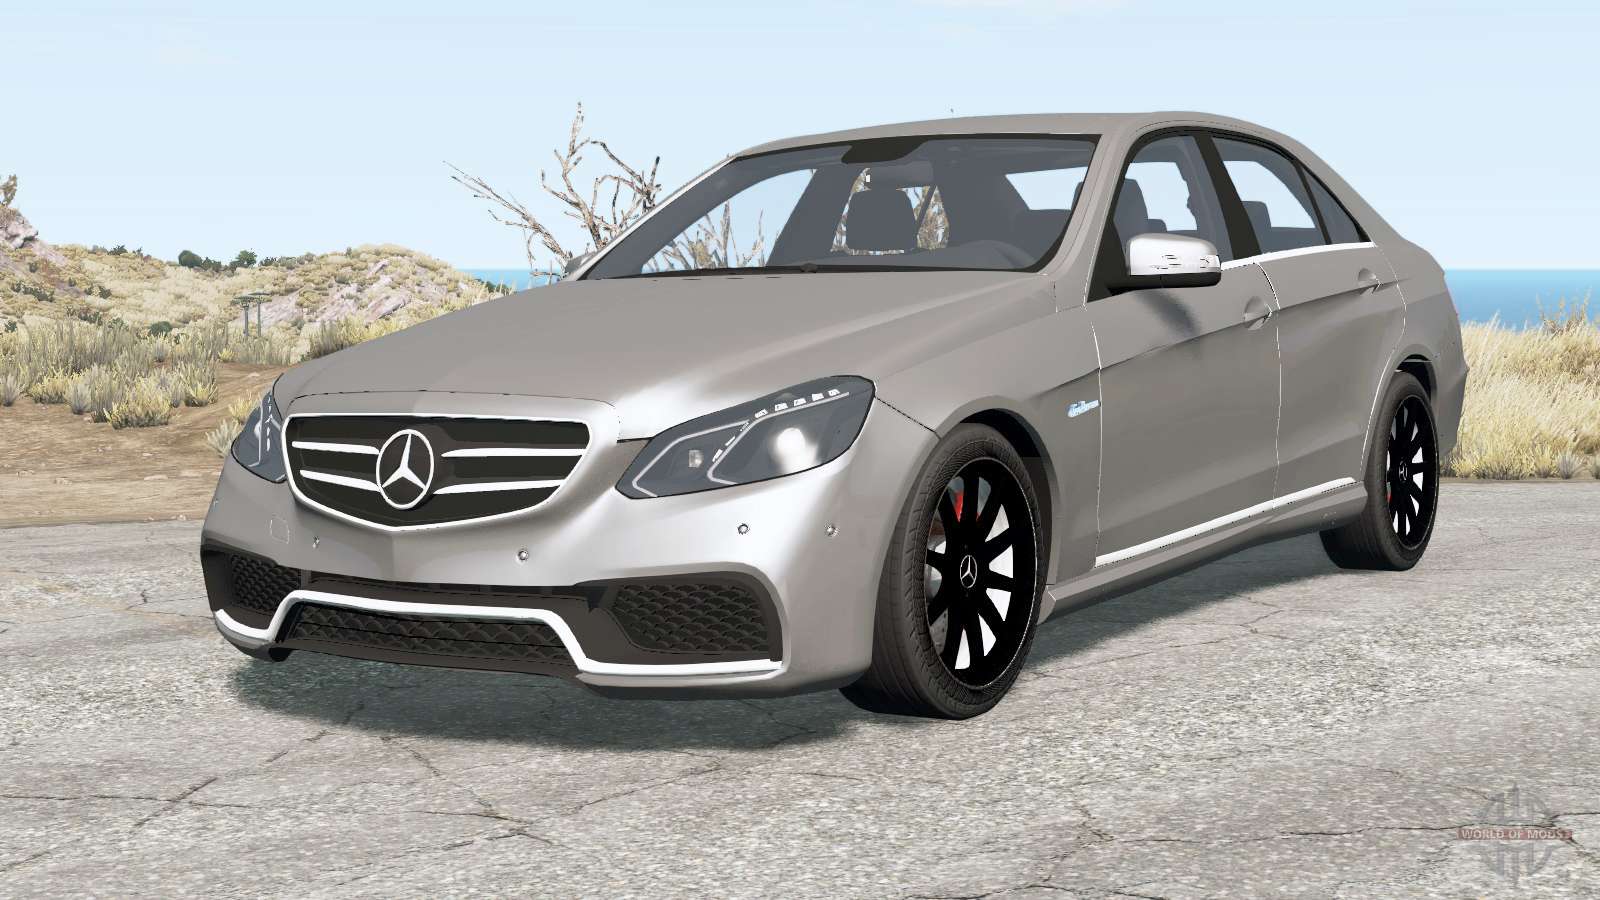 Beamng mod mercedes. Mercedes e63 AMG для BEAMNG Drive. E63 BEAMNG Drive w212. Mercedes w212 BEAMNG Drive. W212 for BEAMNG Drive.